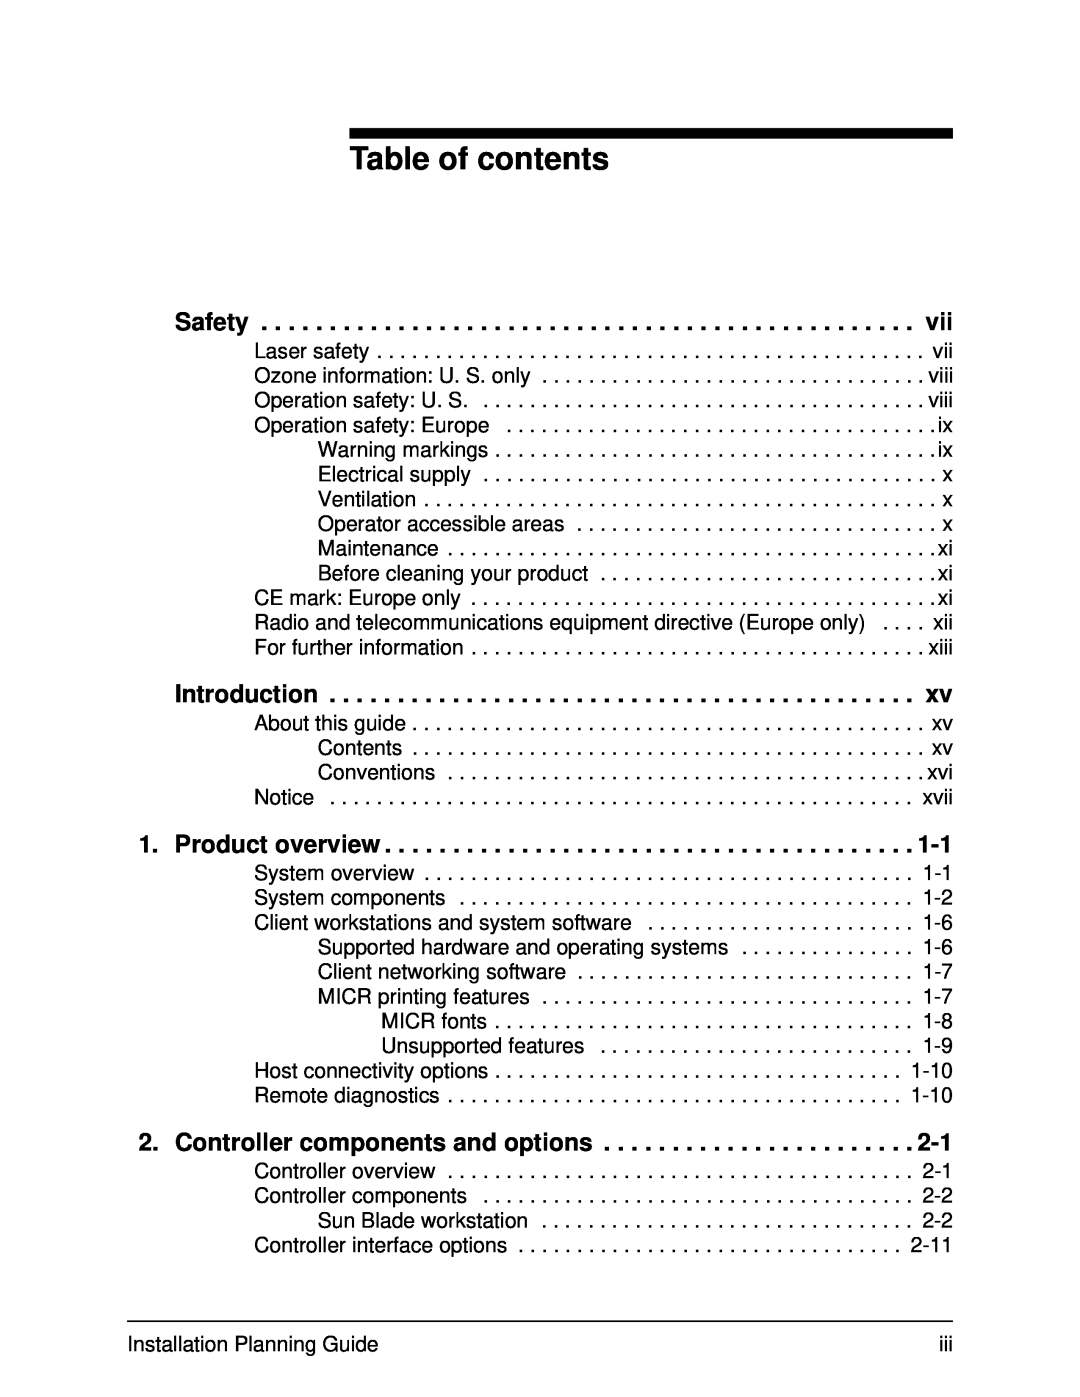 Xerox 115, 100, 155, 135 manual Table of contents, Safety, Introduction, Product overview, Controller components and options 